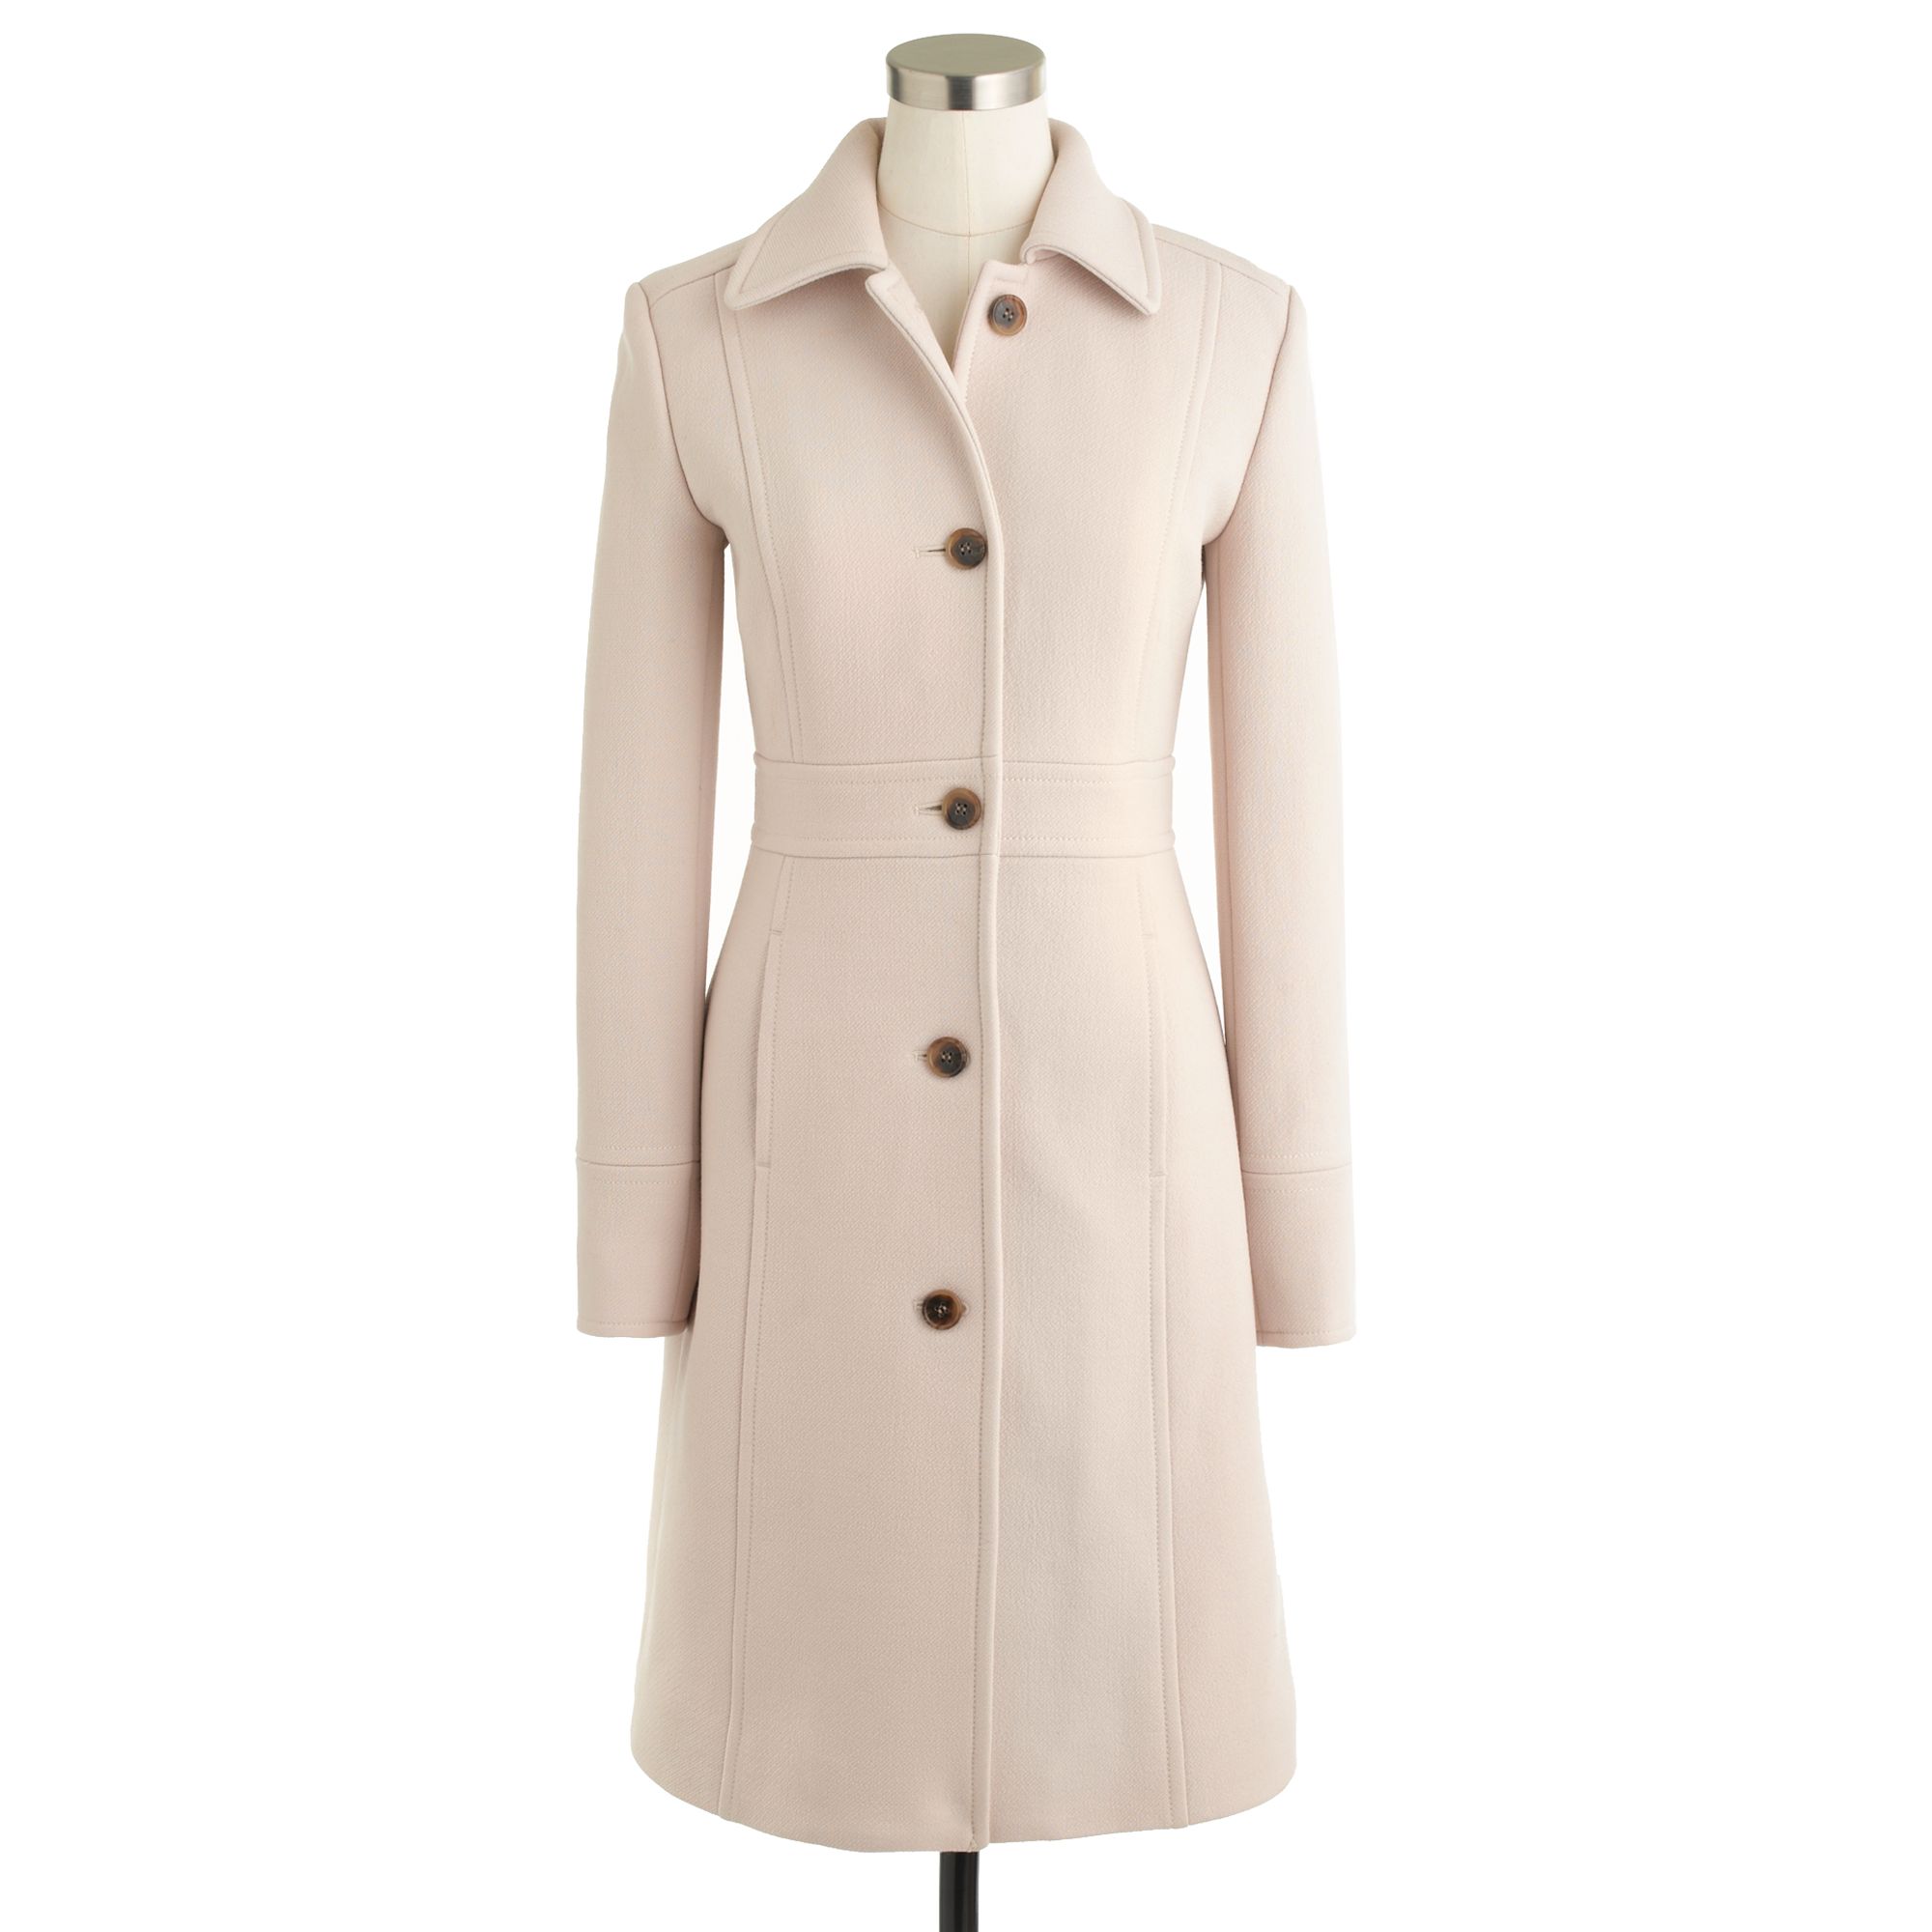 J.crew Double-Cloth Lady Day Coat With Thinsulate® in Beige (antique